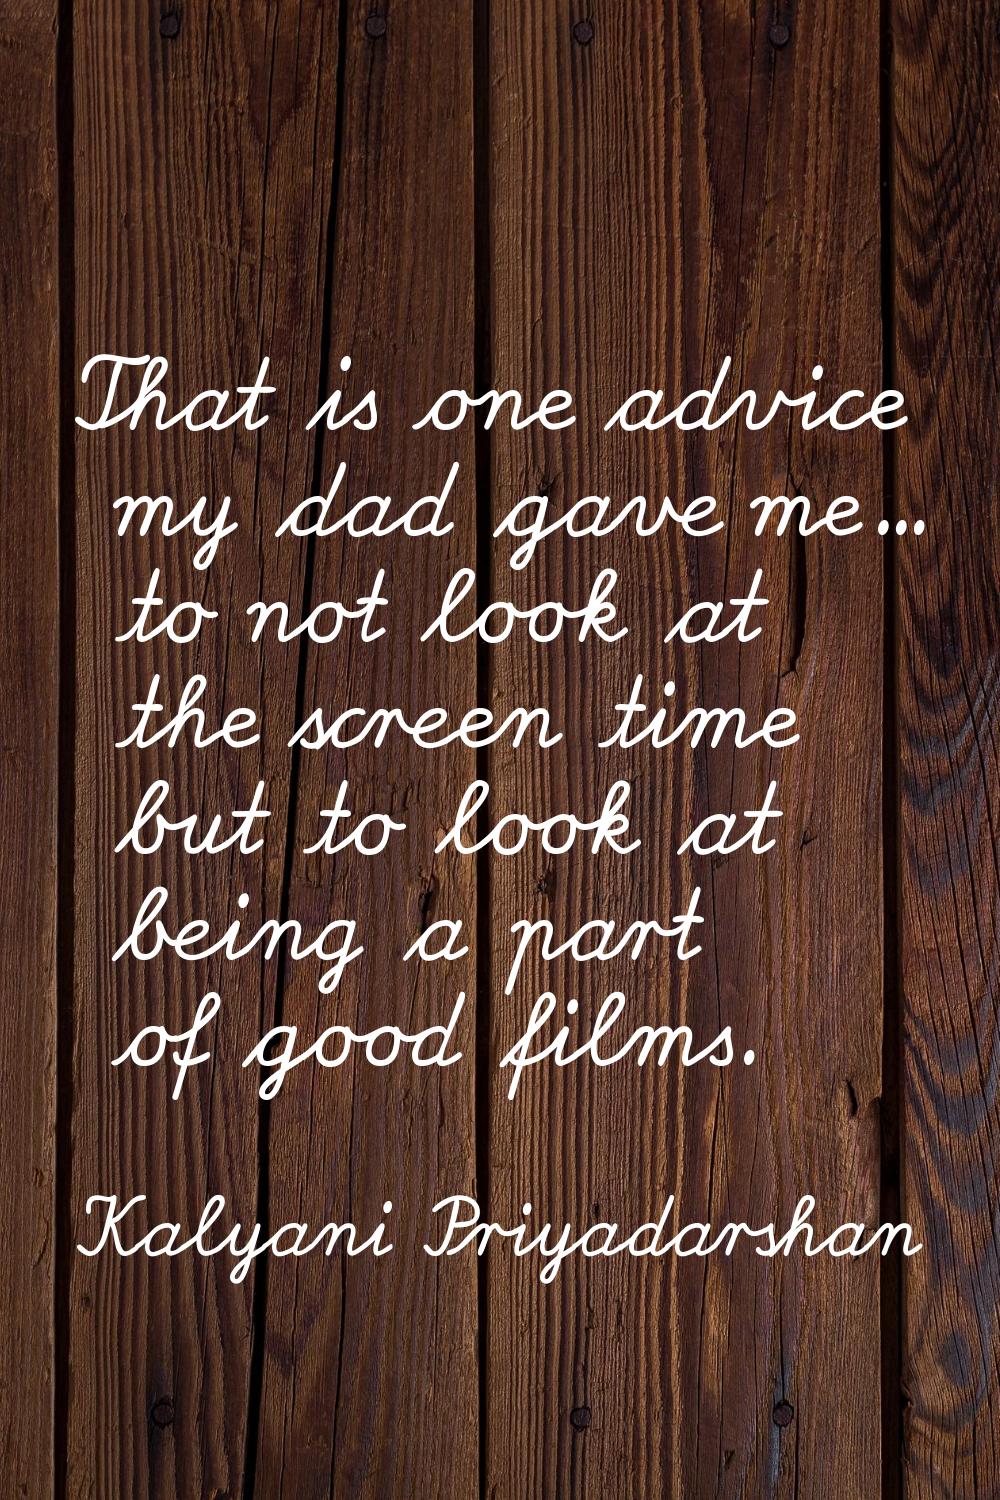 That is one advice my dad gave me... to not look at the screen time but to look at being a part of 